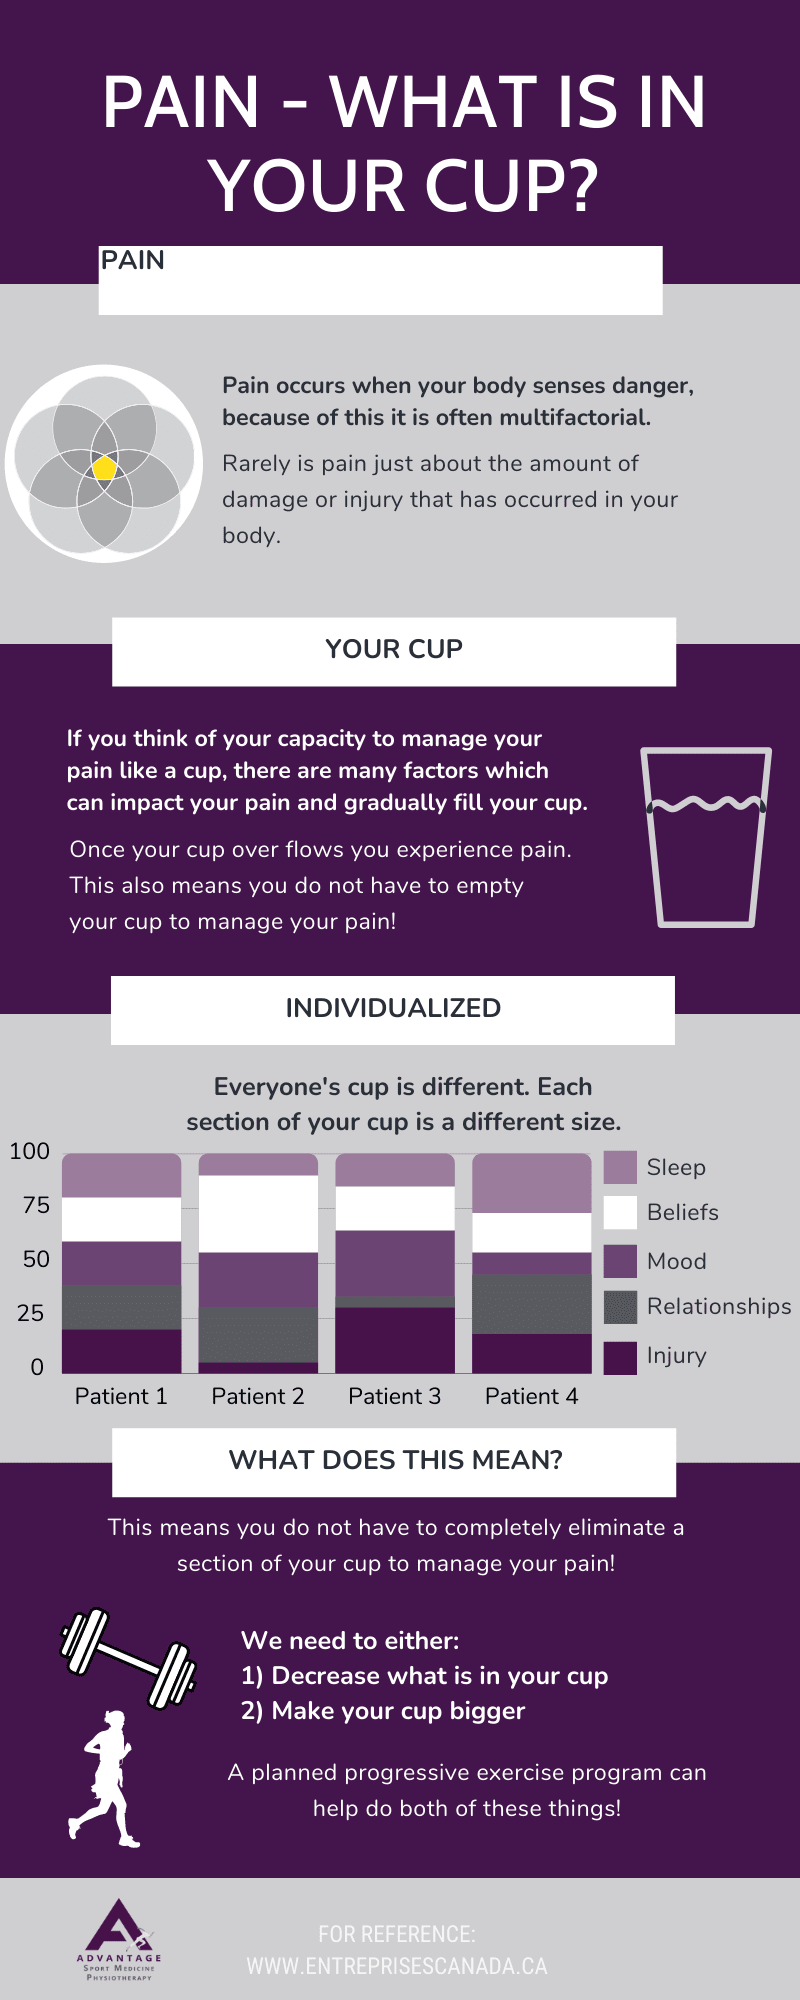 Pain - what is in the cup pain 101